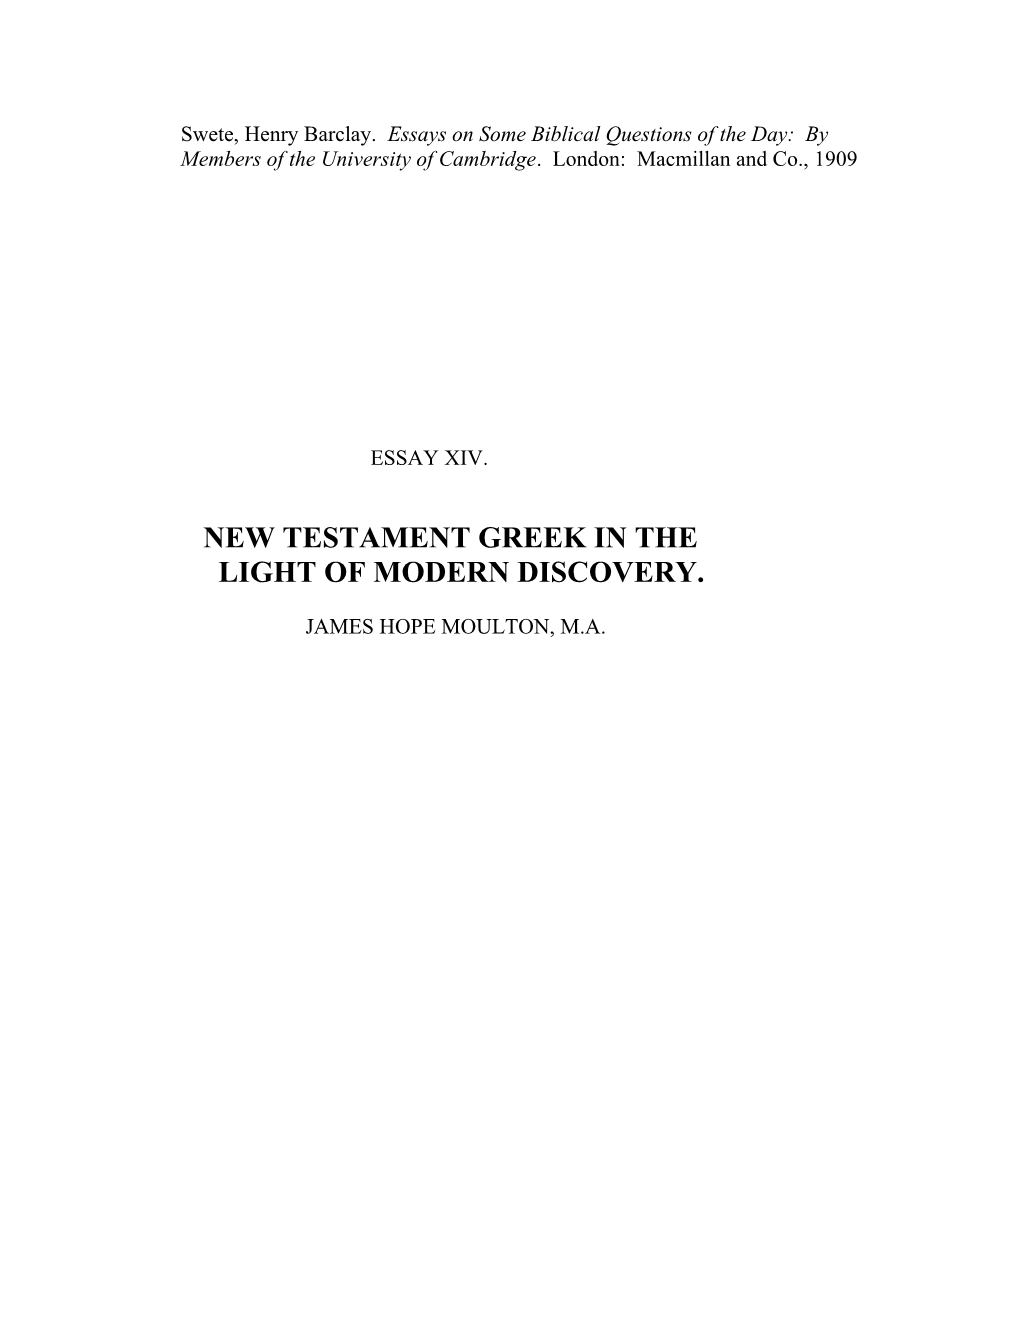 New Testament Greek in the Light of Modern Discovery